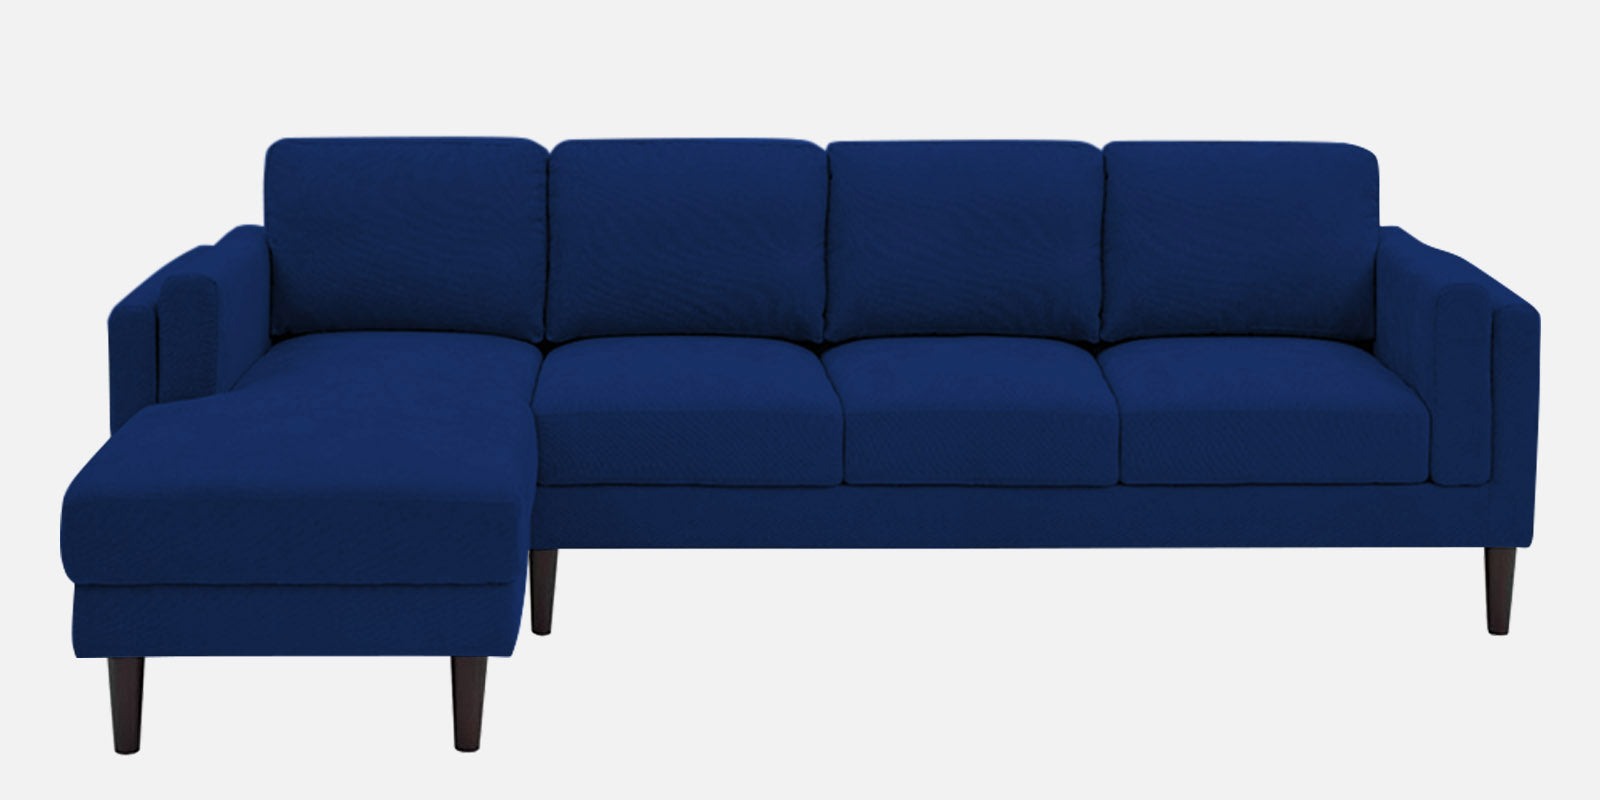 Creata Fabric RHS Sectional Sofa (3+Lounger) in Royal Blue Colour by Febonic